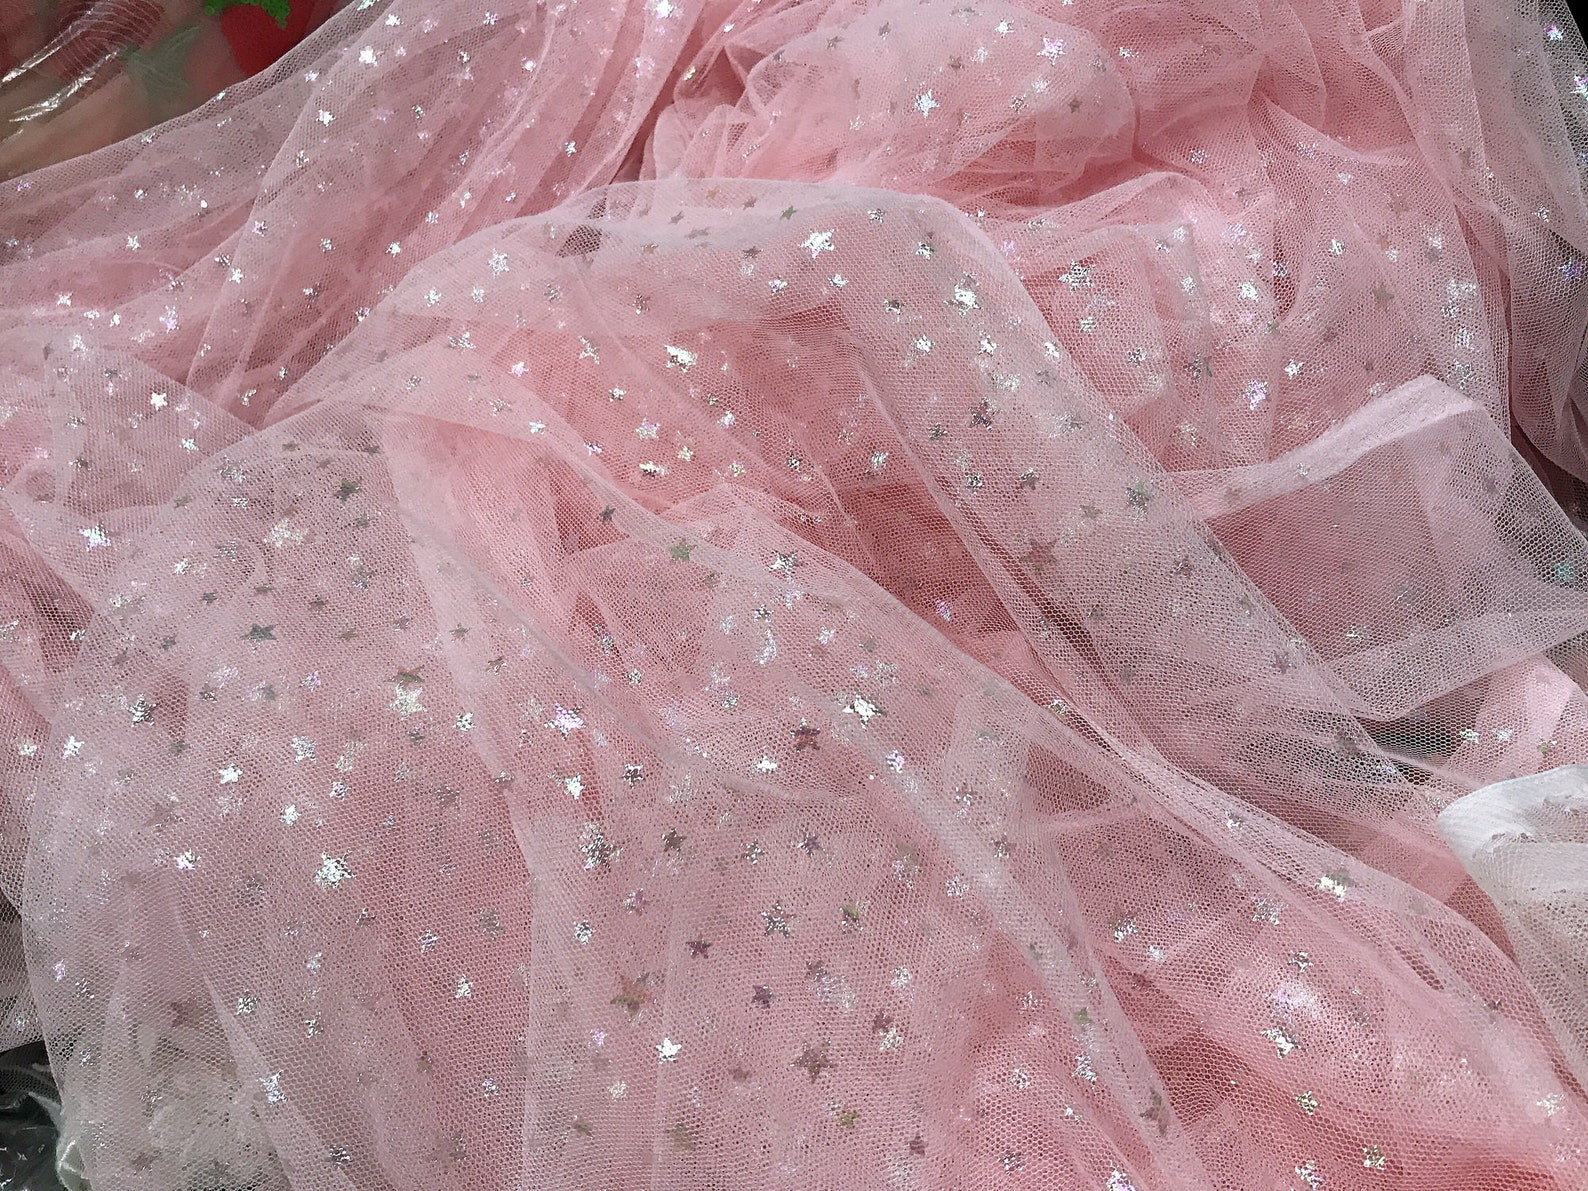 Pink Tulle Fabric Colorful Stars Pattern Lace Fabric for Party | Etsy